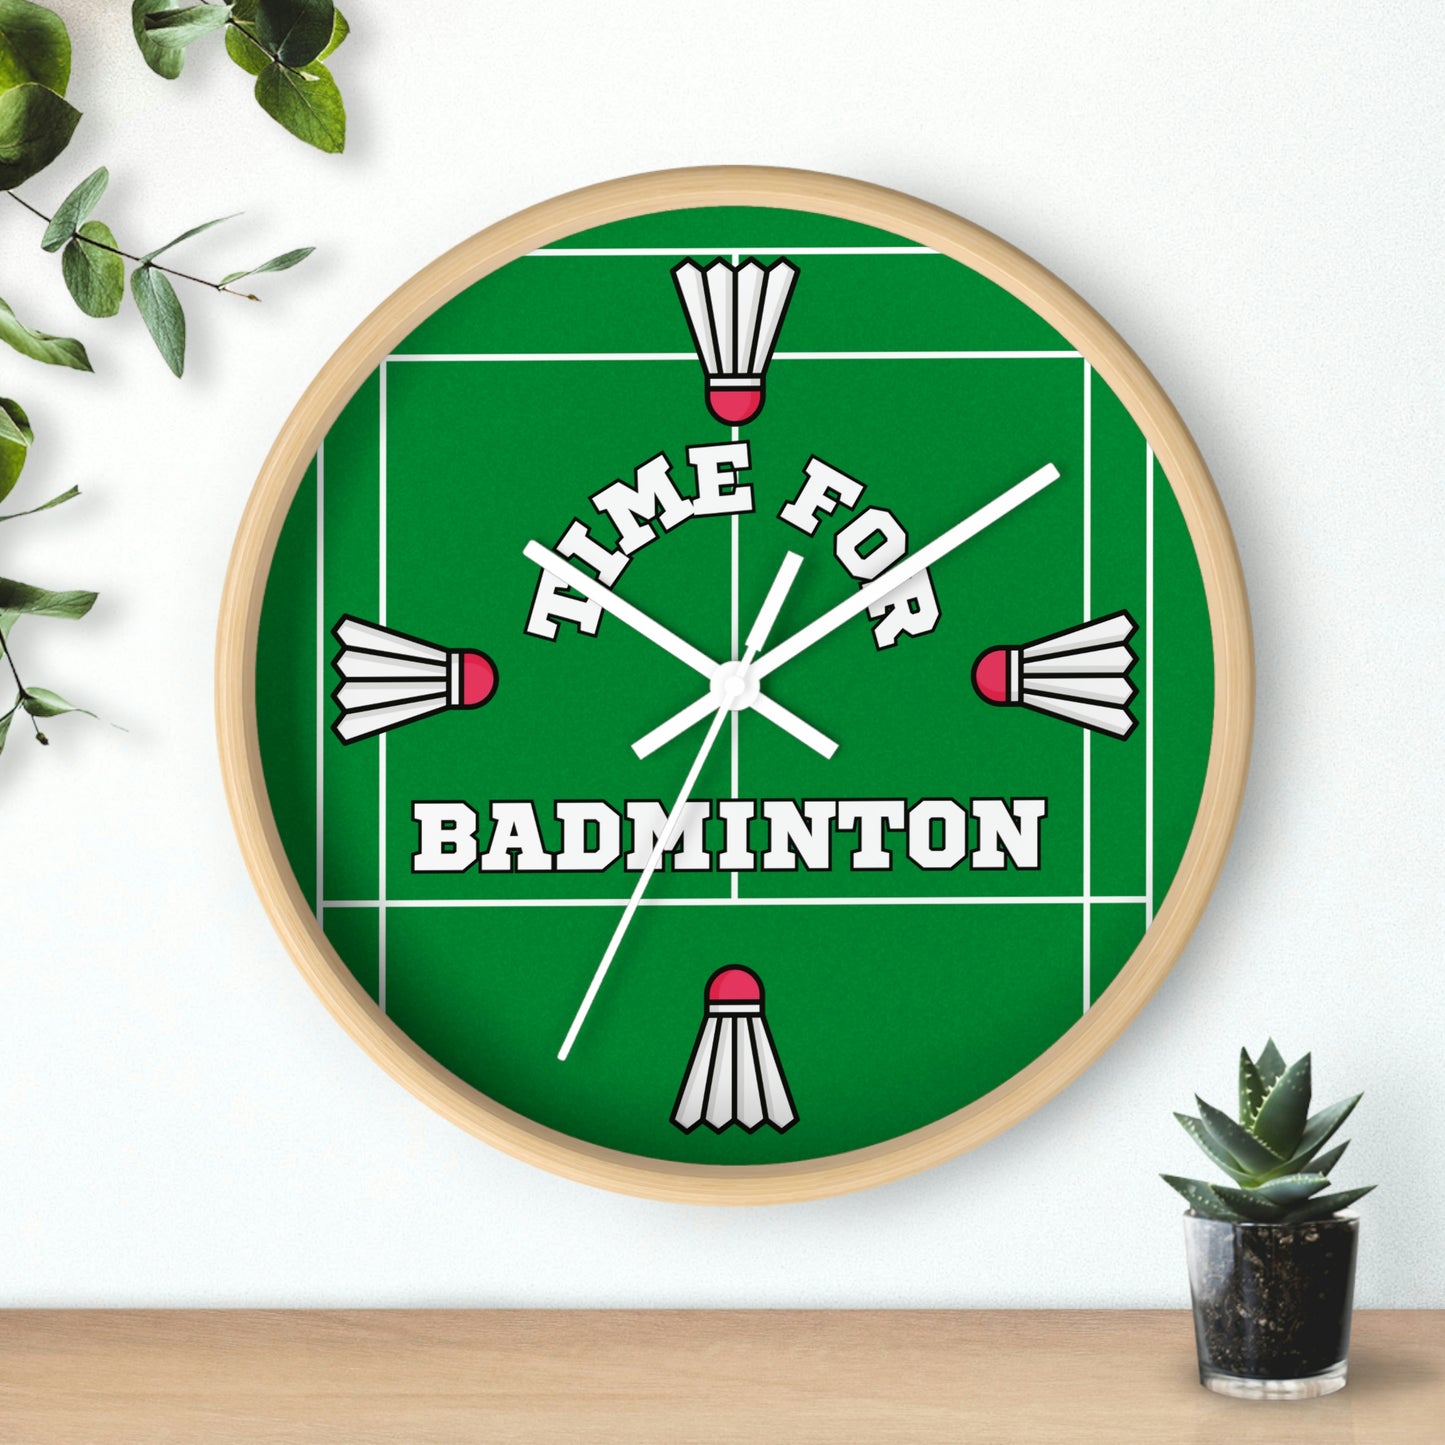 Time for Badminton Clock!